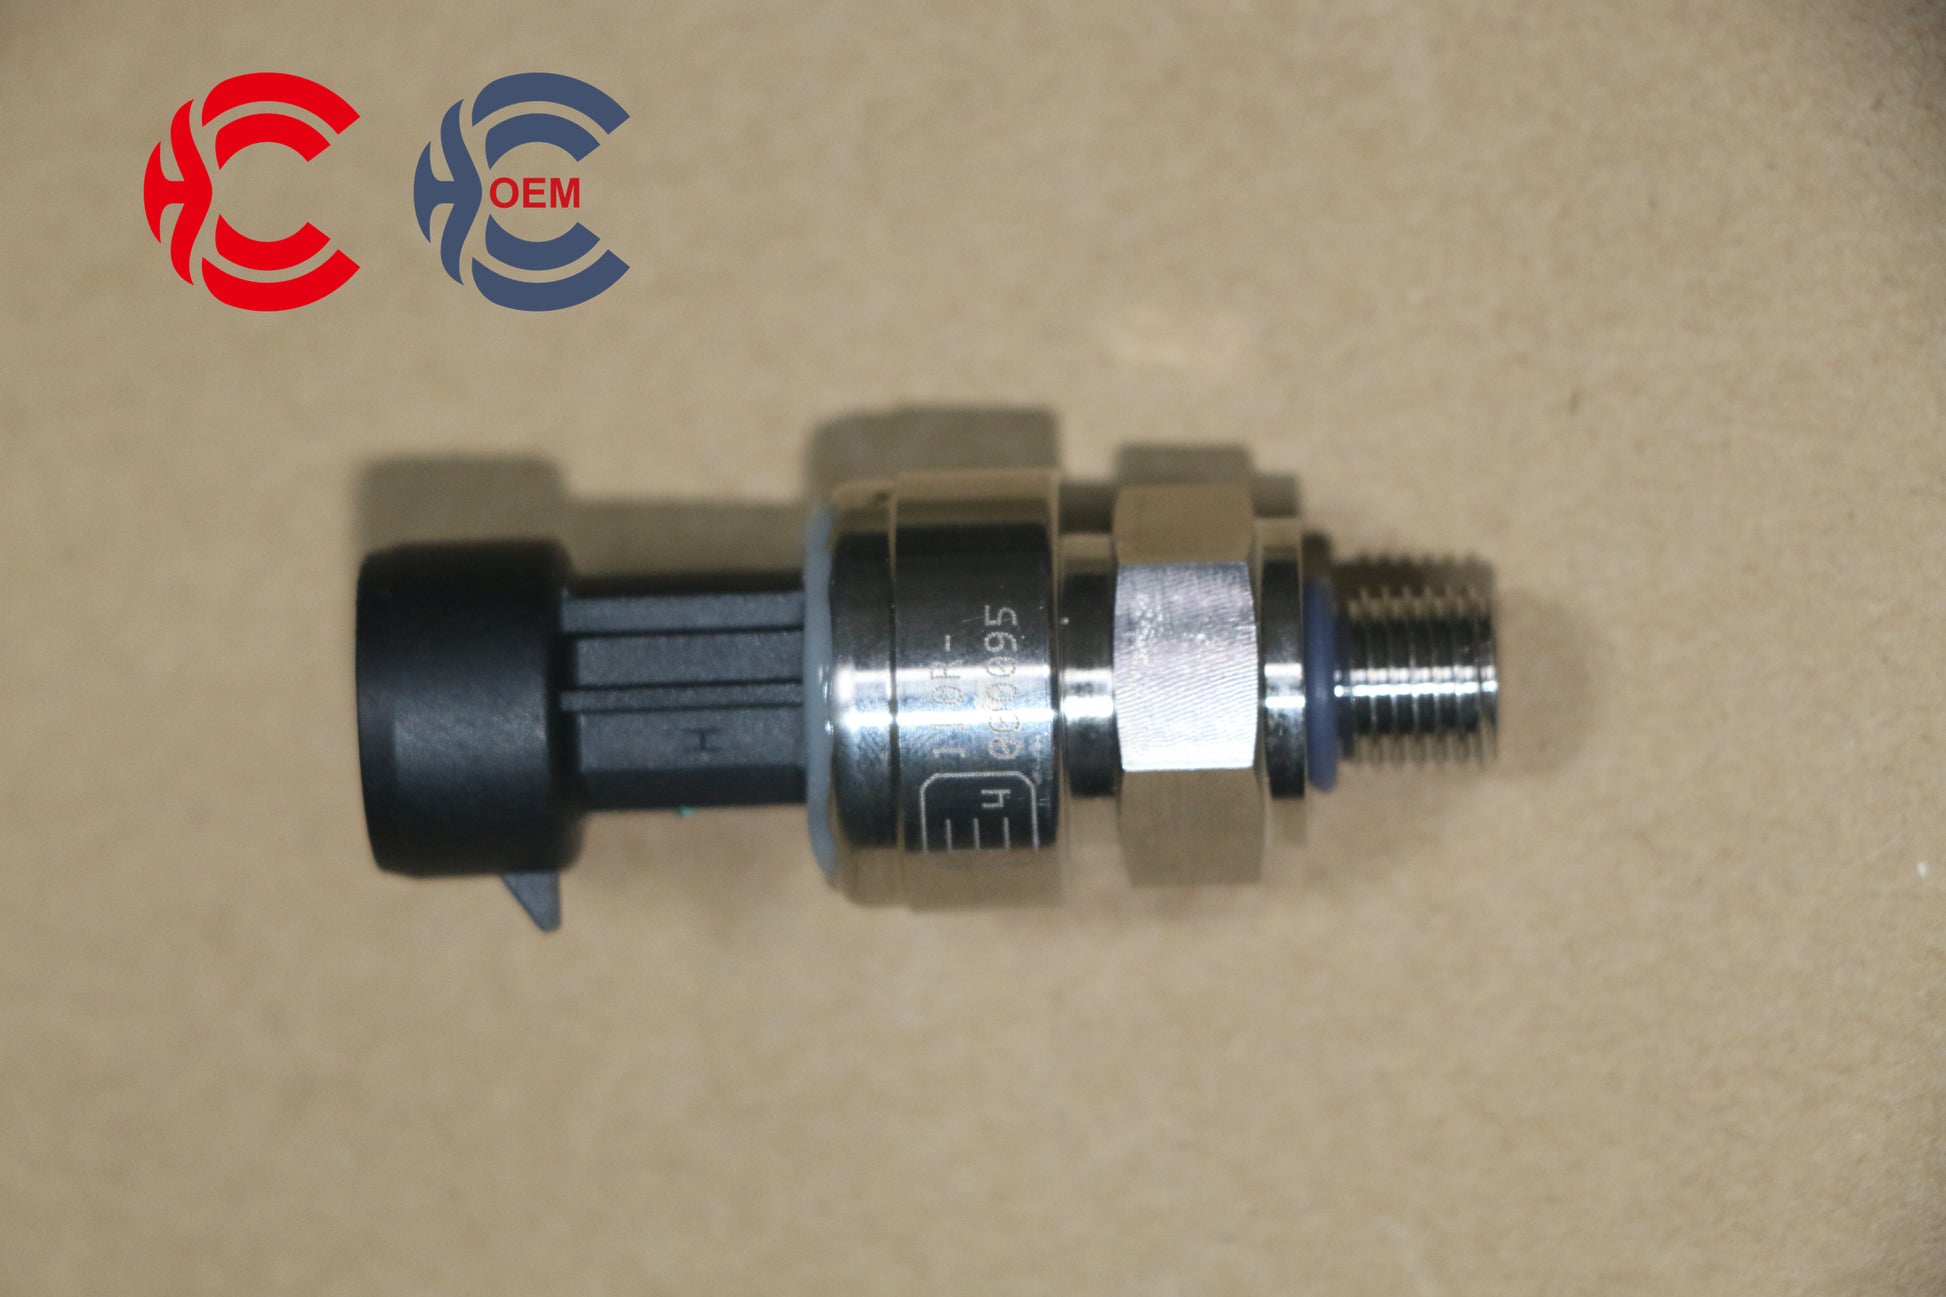 OEM: 110R-00095 1680-1042 13060072 T88-298-0Material: ABS metalColor: black silverOrigin: Made in ChinaWeight: 100gPacking List: 1* Fuel Pressure Sensor More ServiceWe can provide OEM Manufacturing serviceWe can Be your one-step solution for Auto PartsWe can provide technical scheme for you Feel Free to Contact Us, We will get back to you as soon as possible.